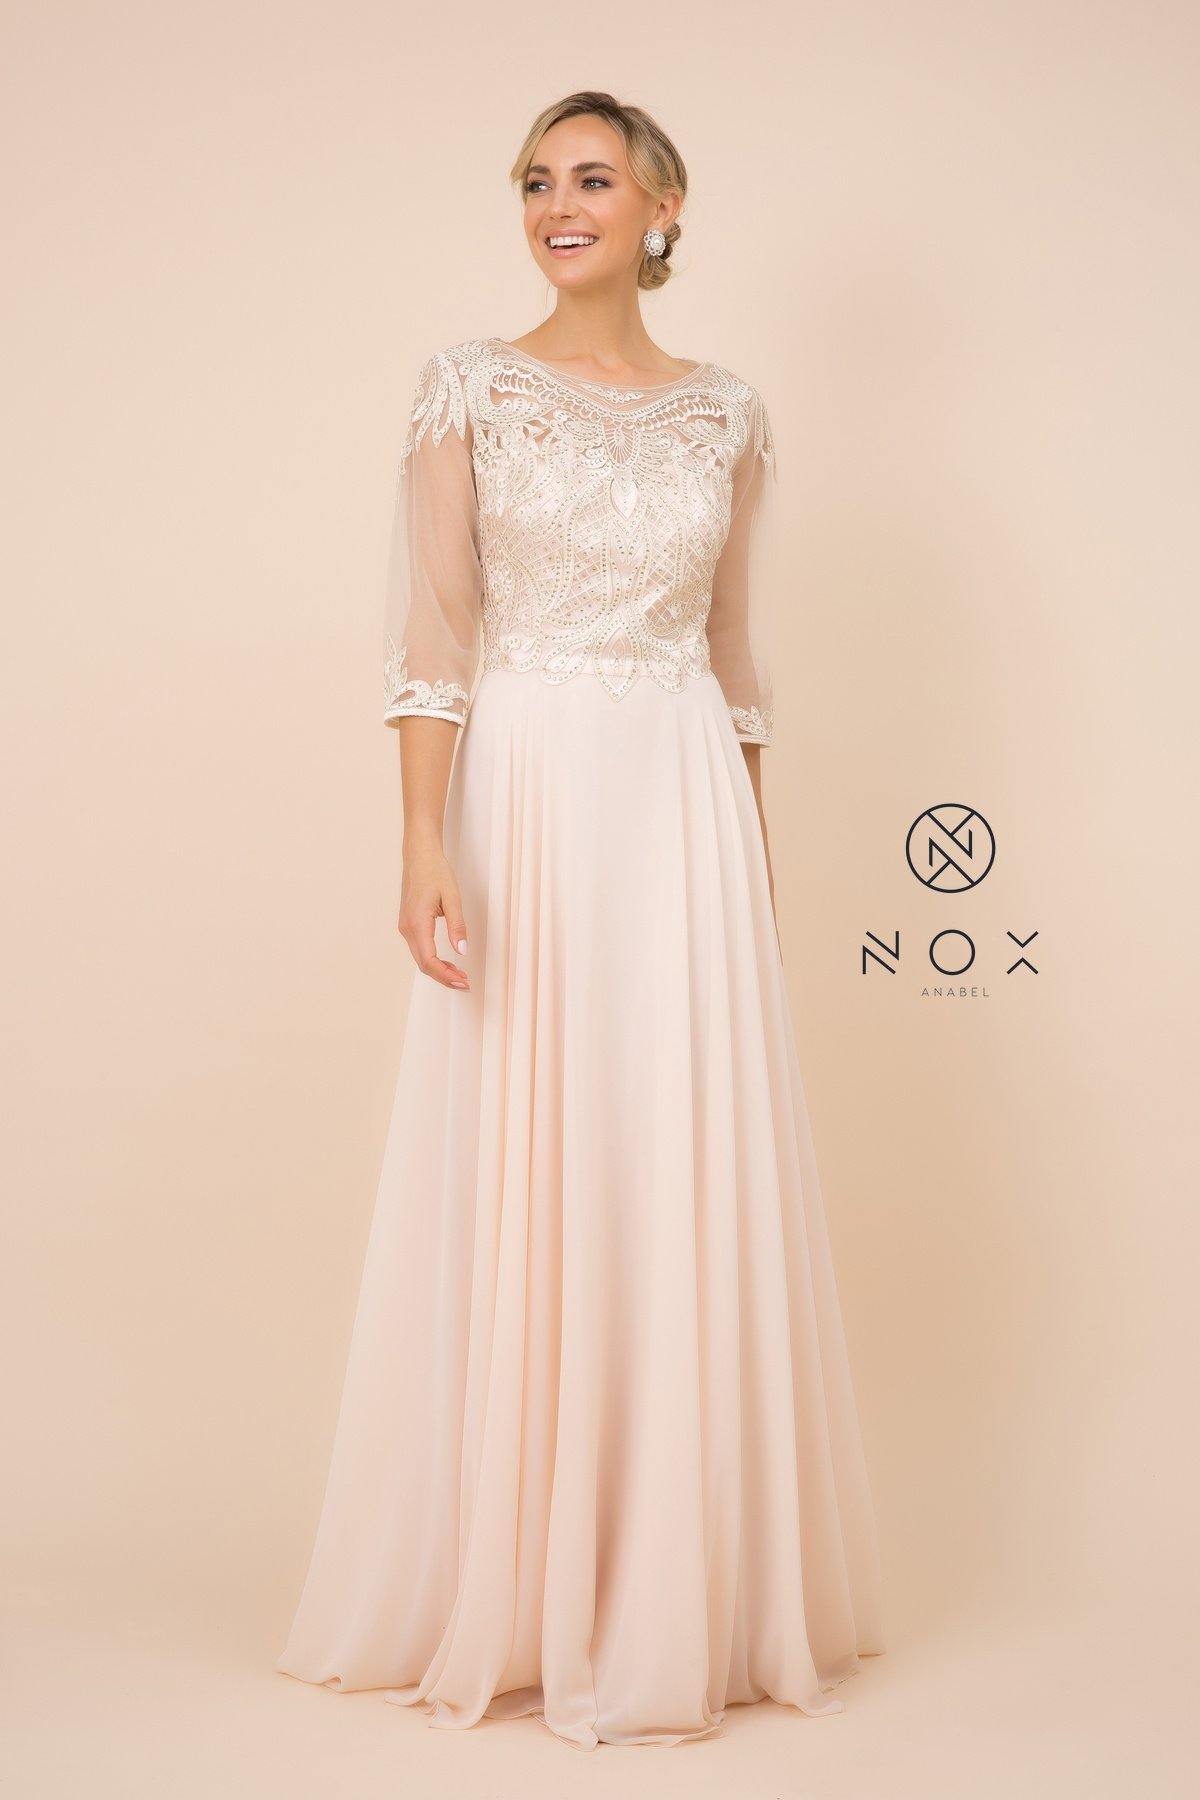 Lace Applique Chiffon Long Gown Formal - The Dress Outlet Nox Anabel